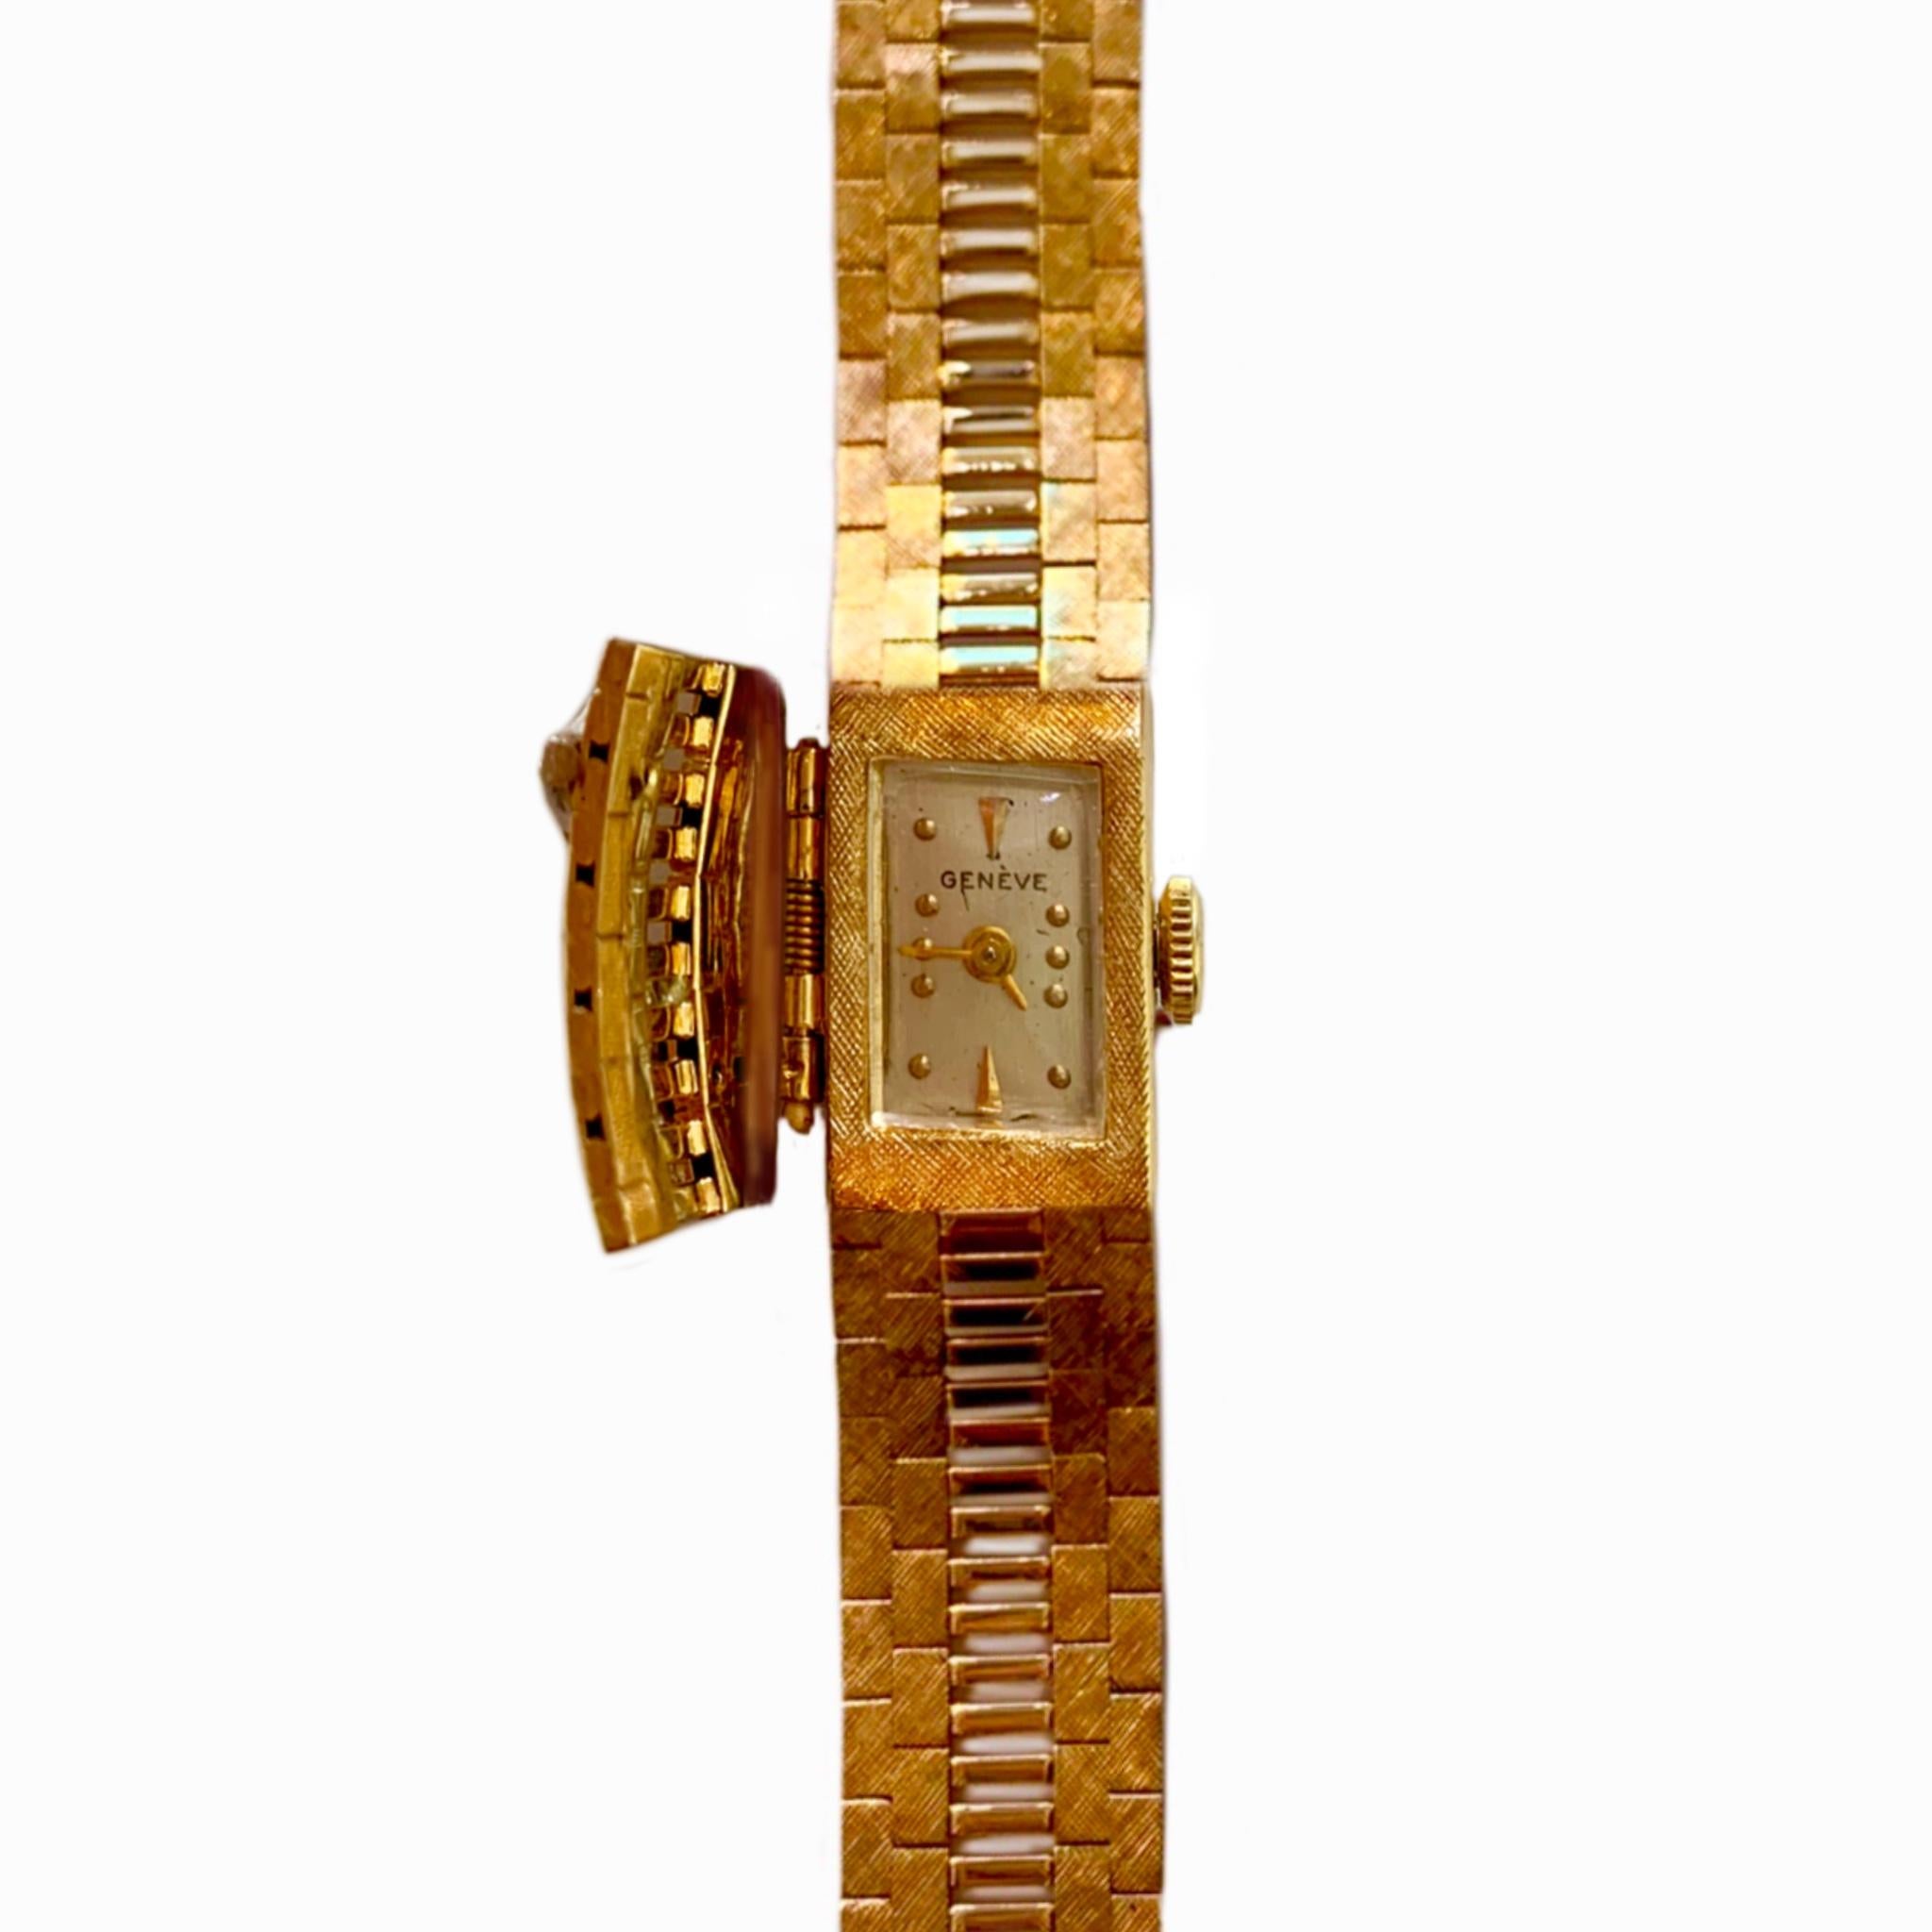 Unique 14 karat yellow gold Geneve watch with 17 jewel Swiss manual wind movement. It is set with 4 single cut diamonds with a total weight of approximately 0.08 carats. The integrated bracelet is accented with a Florentine finish. The plunger clasp